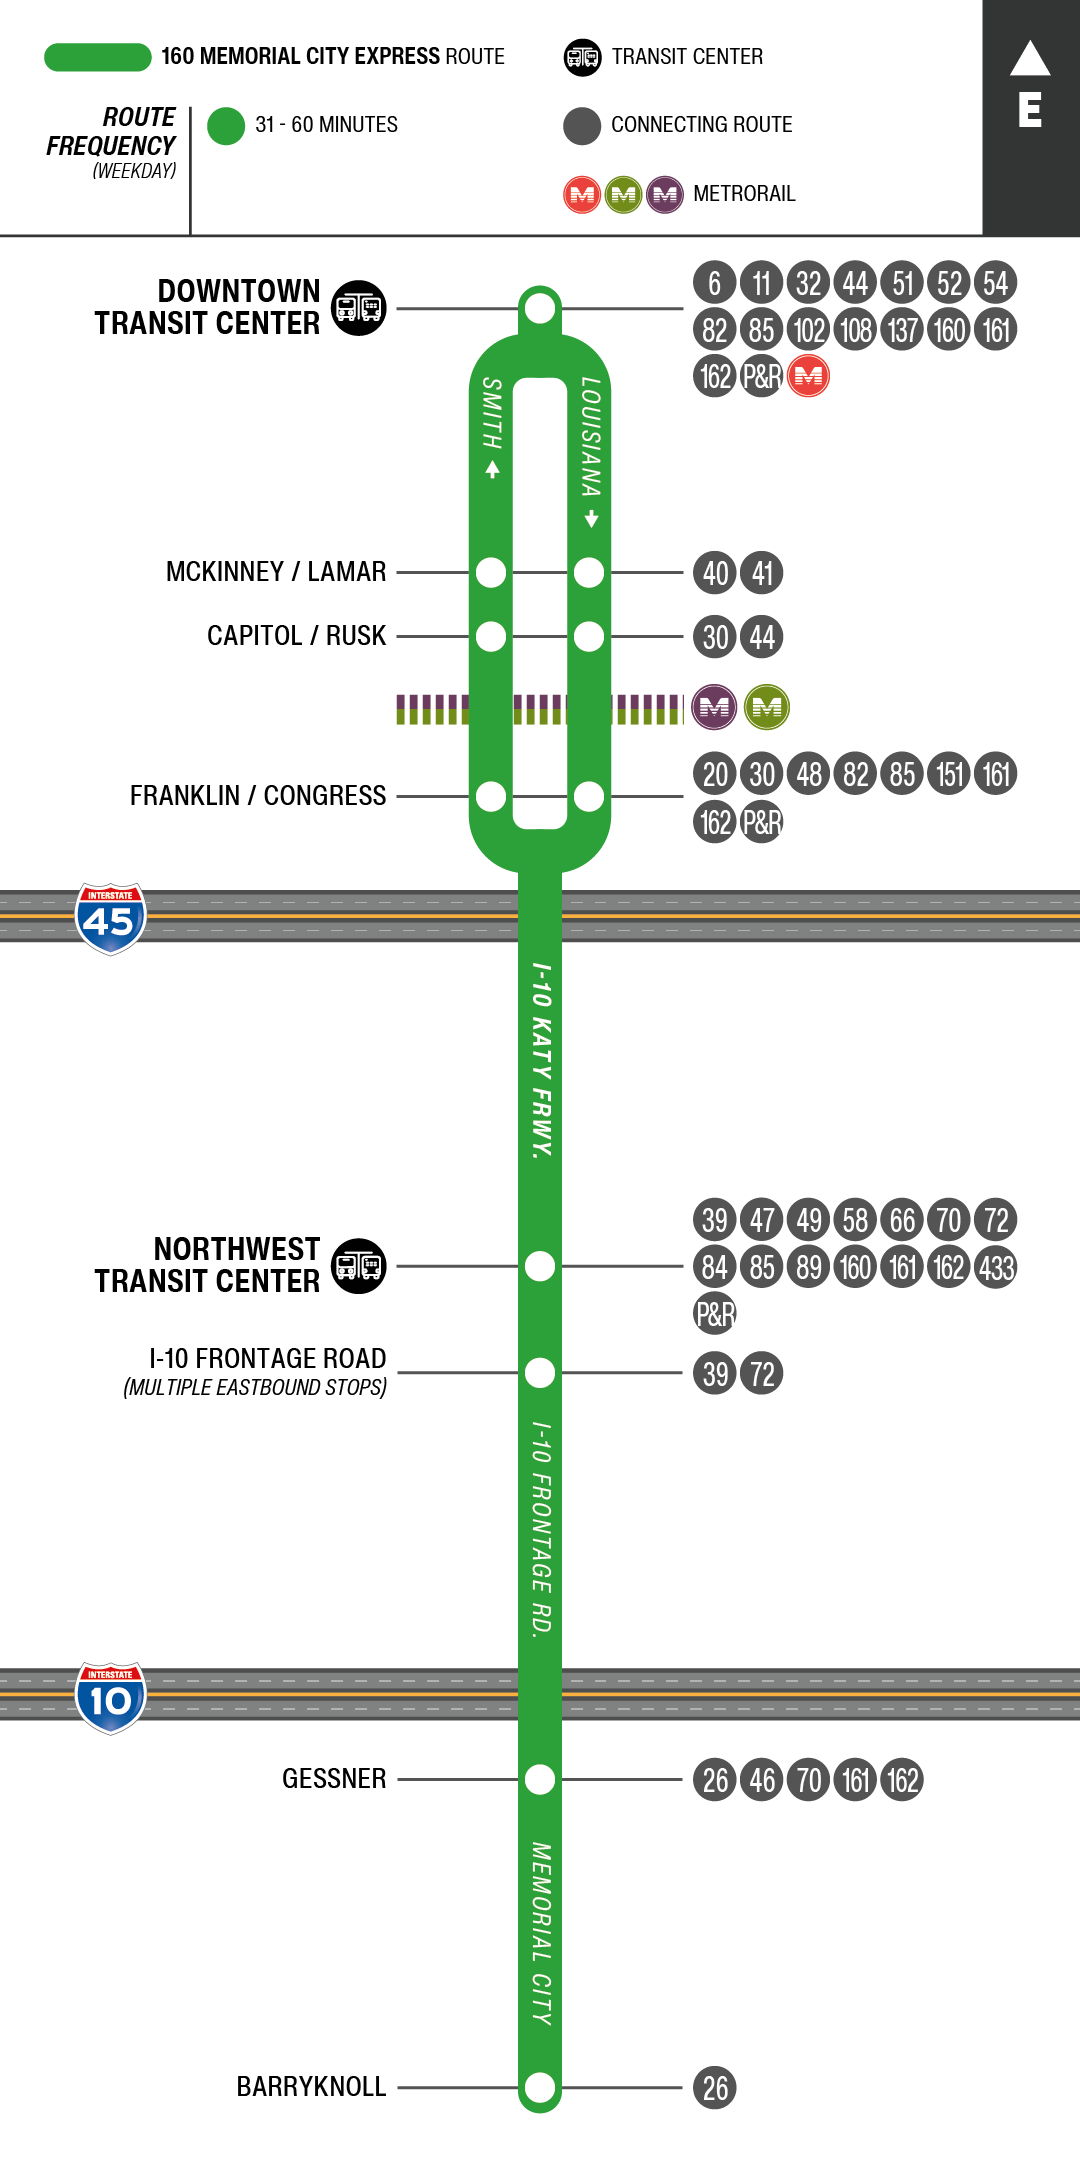 Route map for 160 Memorial City Express bus